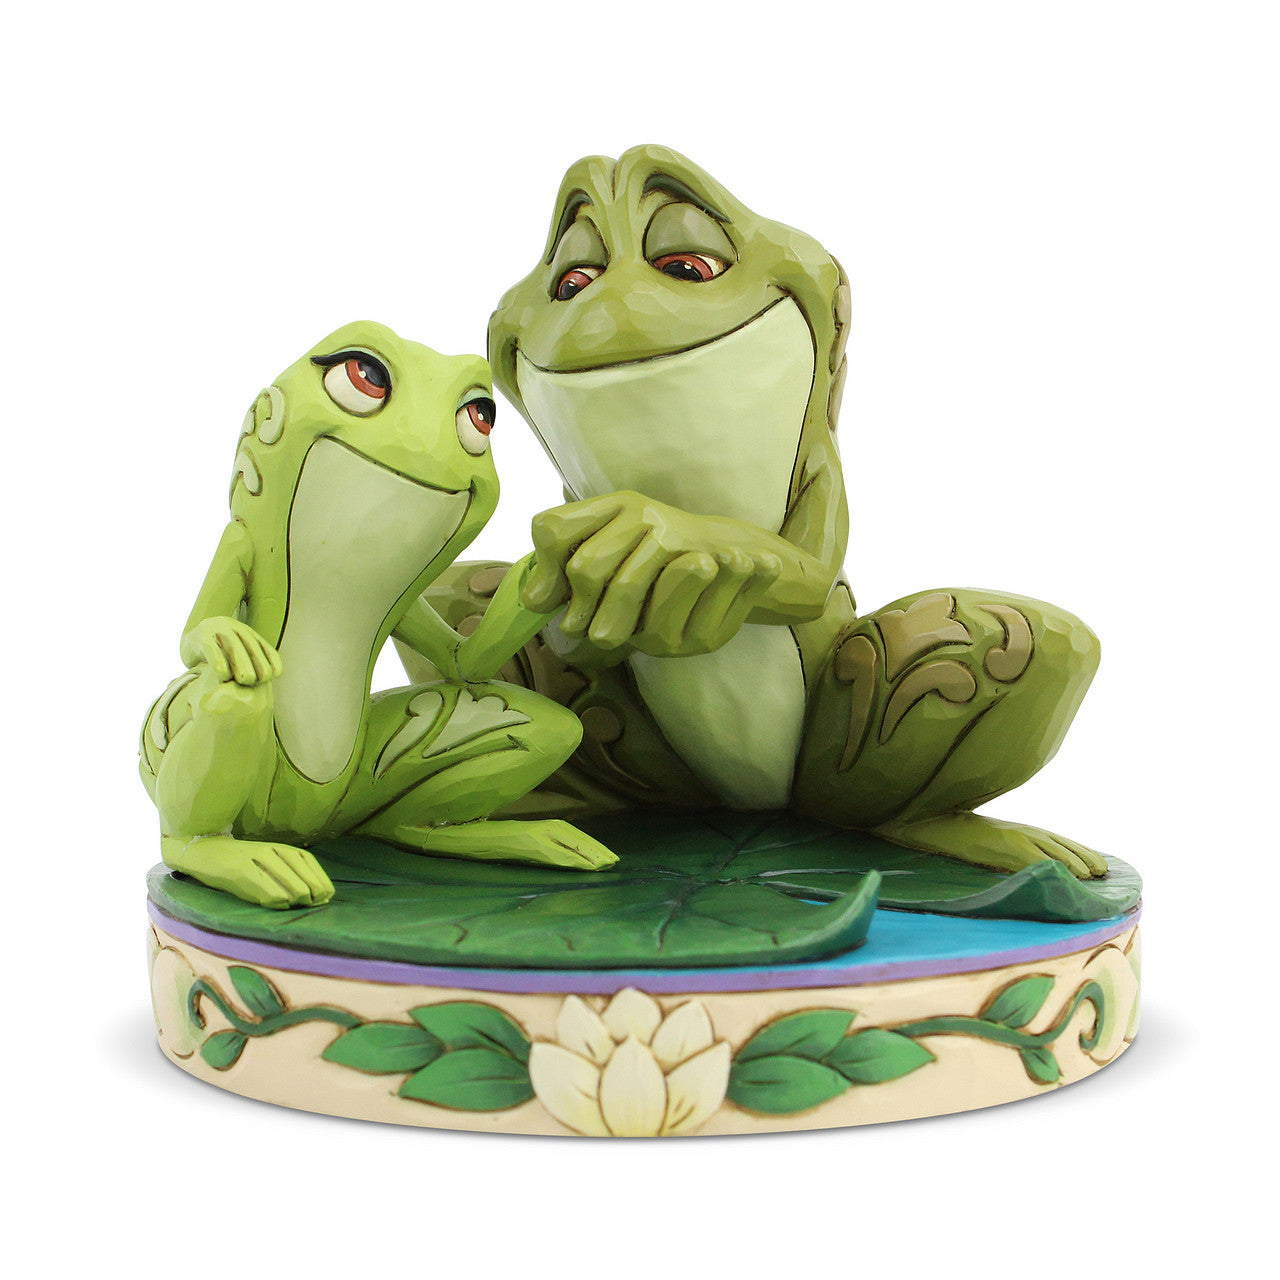 Amorous Amphibians - Tiana and Naveen as Frogs